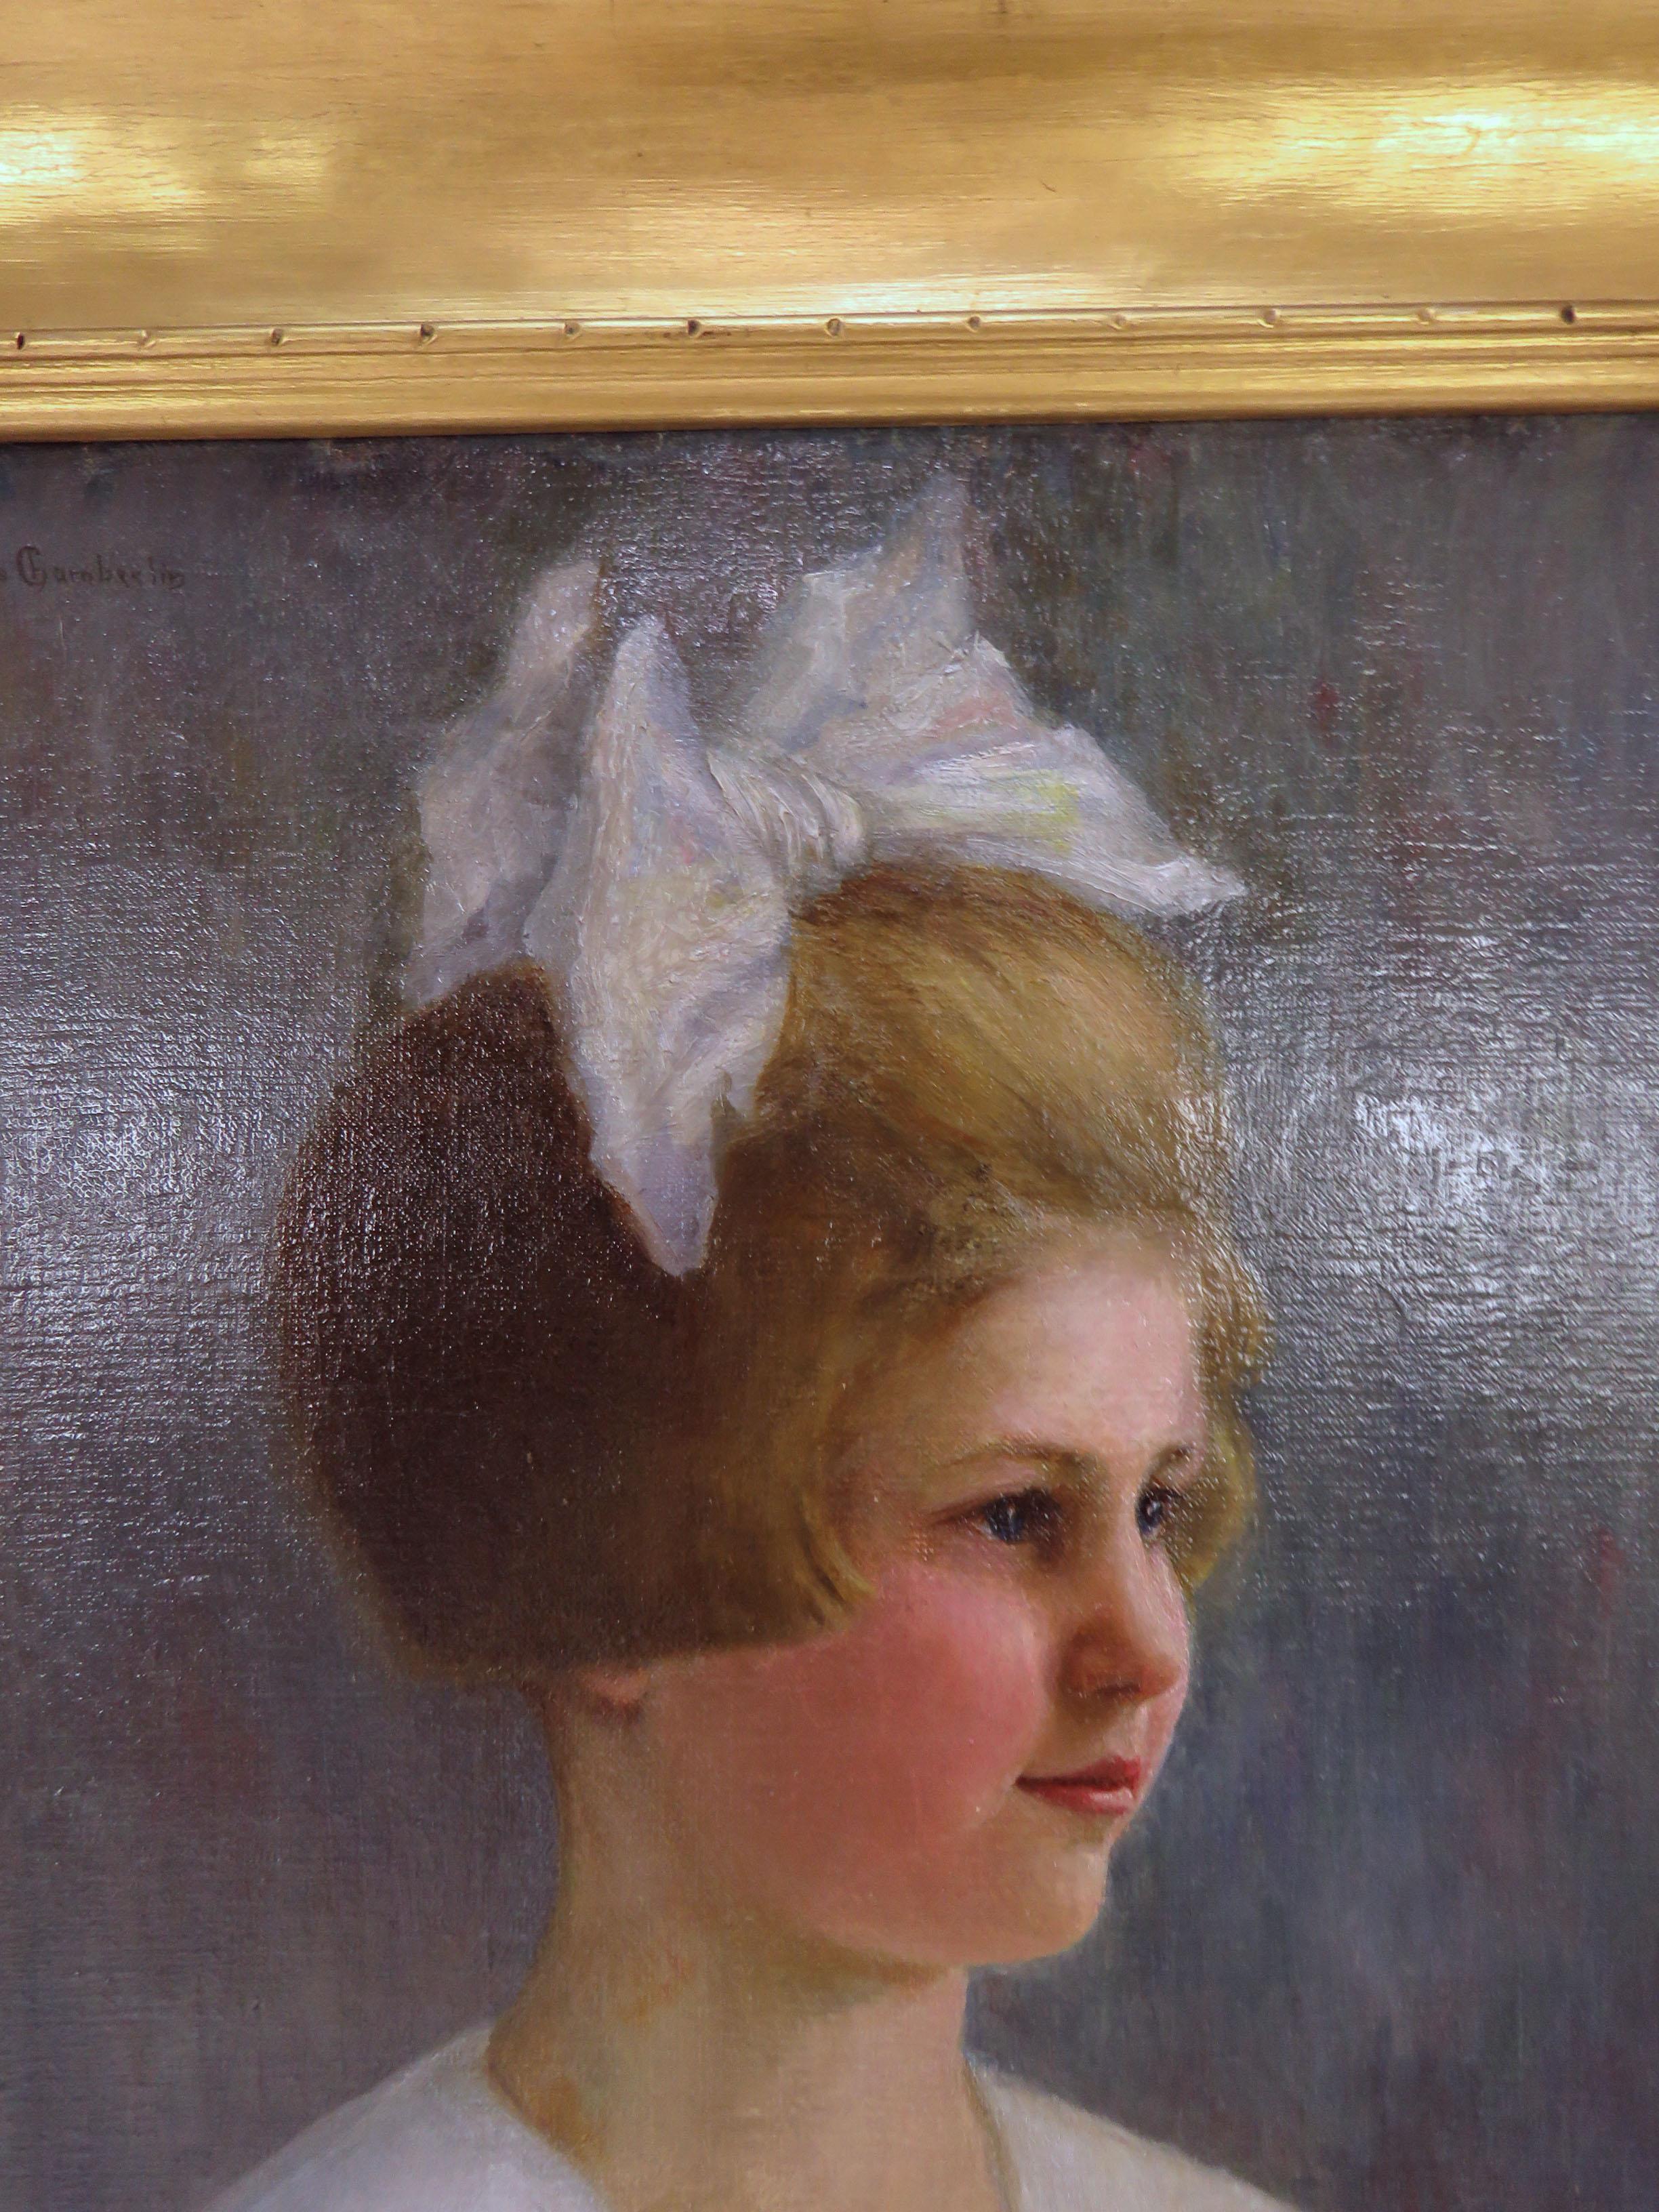 Fine early 20th century Boston School oil painting, portrait of a young girl with a patriotic brooch, by Frances Chamberlin. The young sitter is identified as Harriet White, affectionately known as 